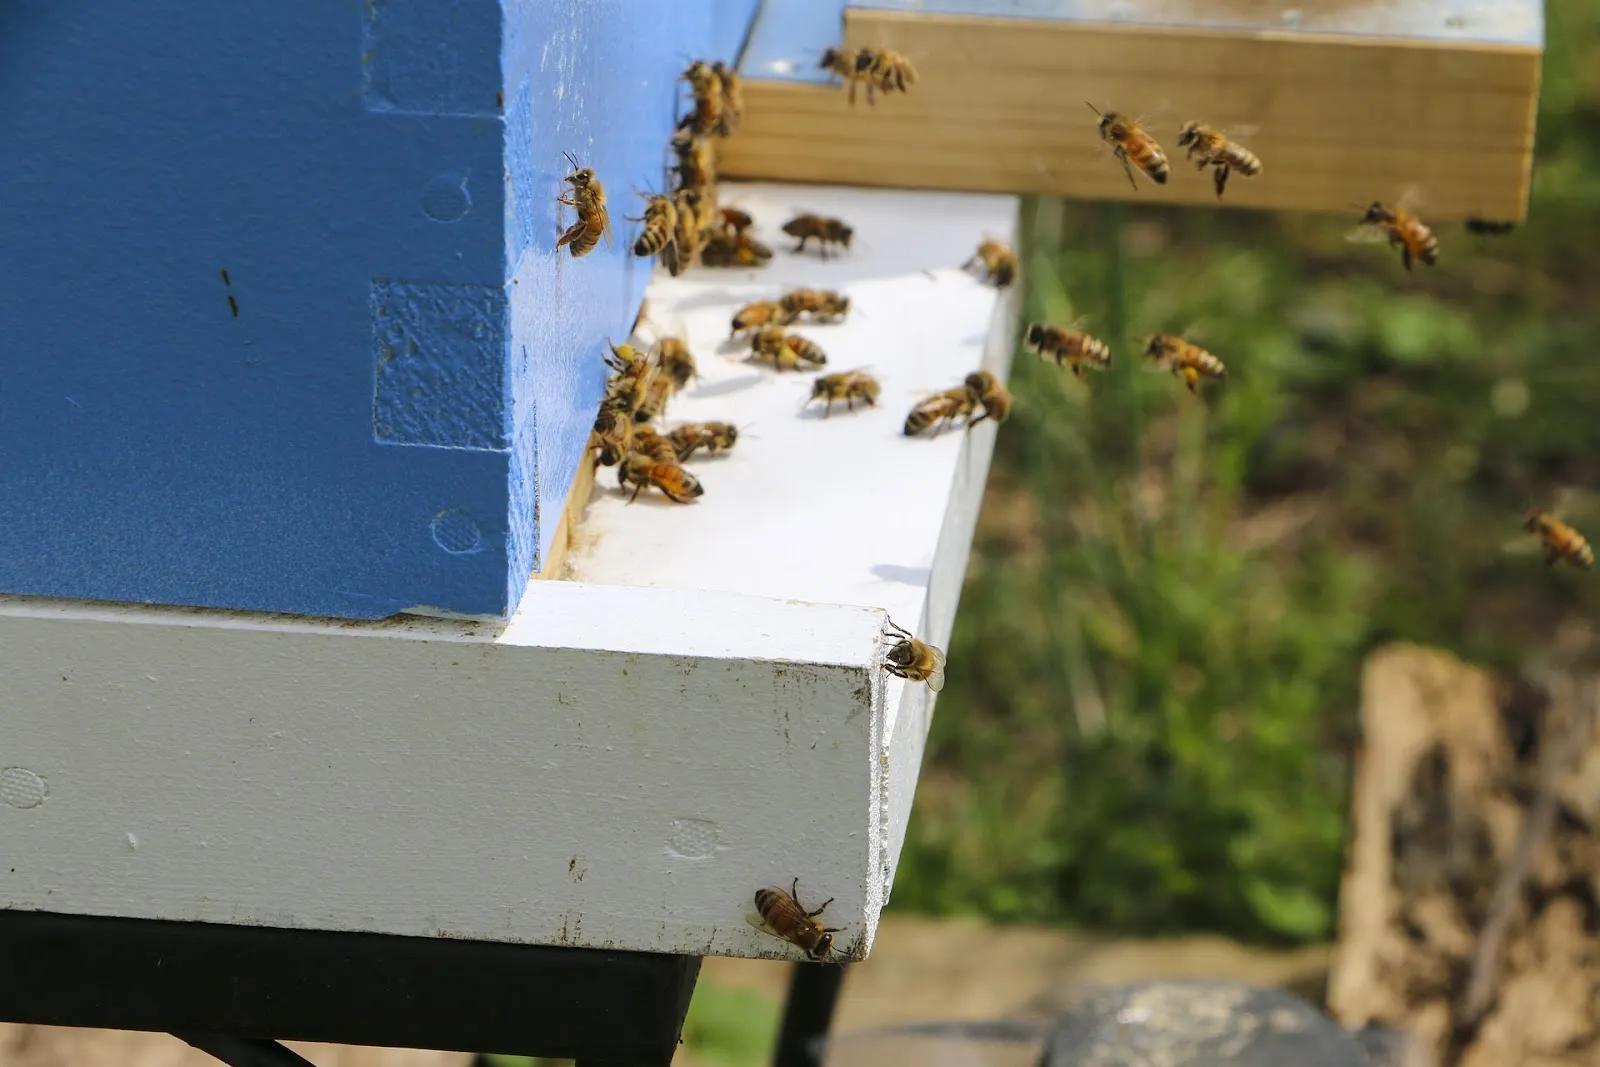 What is the lifespan of a beehive? How long does a beehive last?